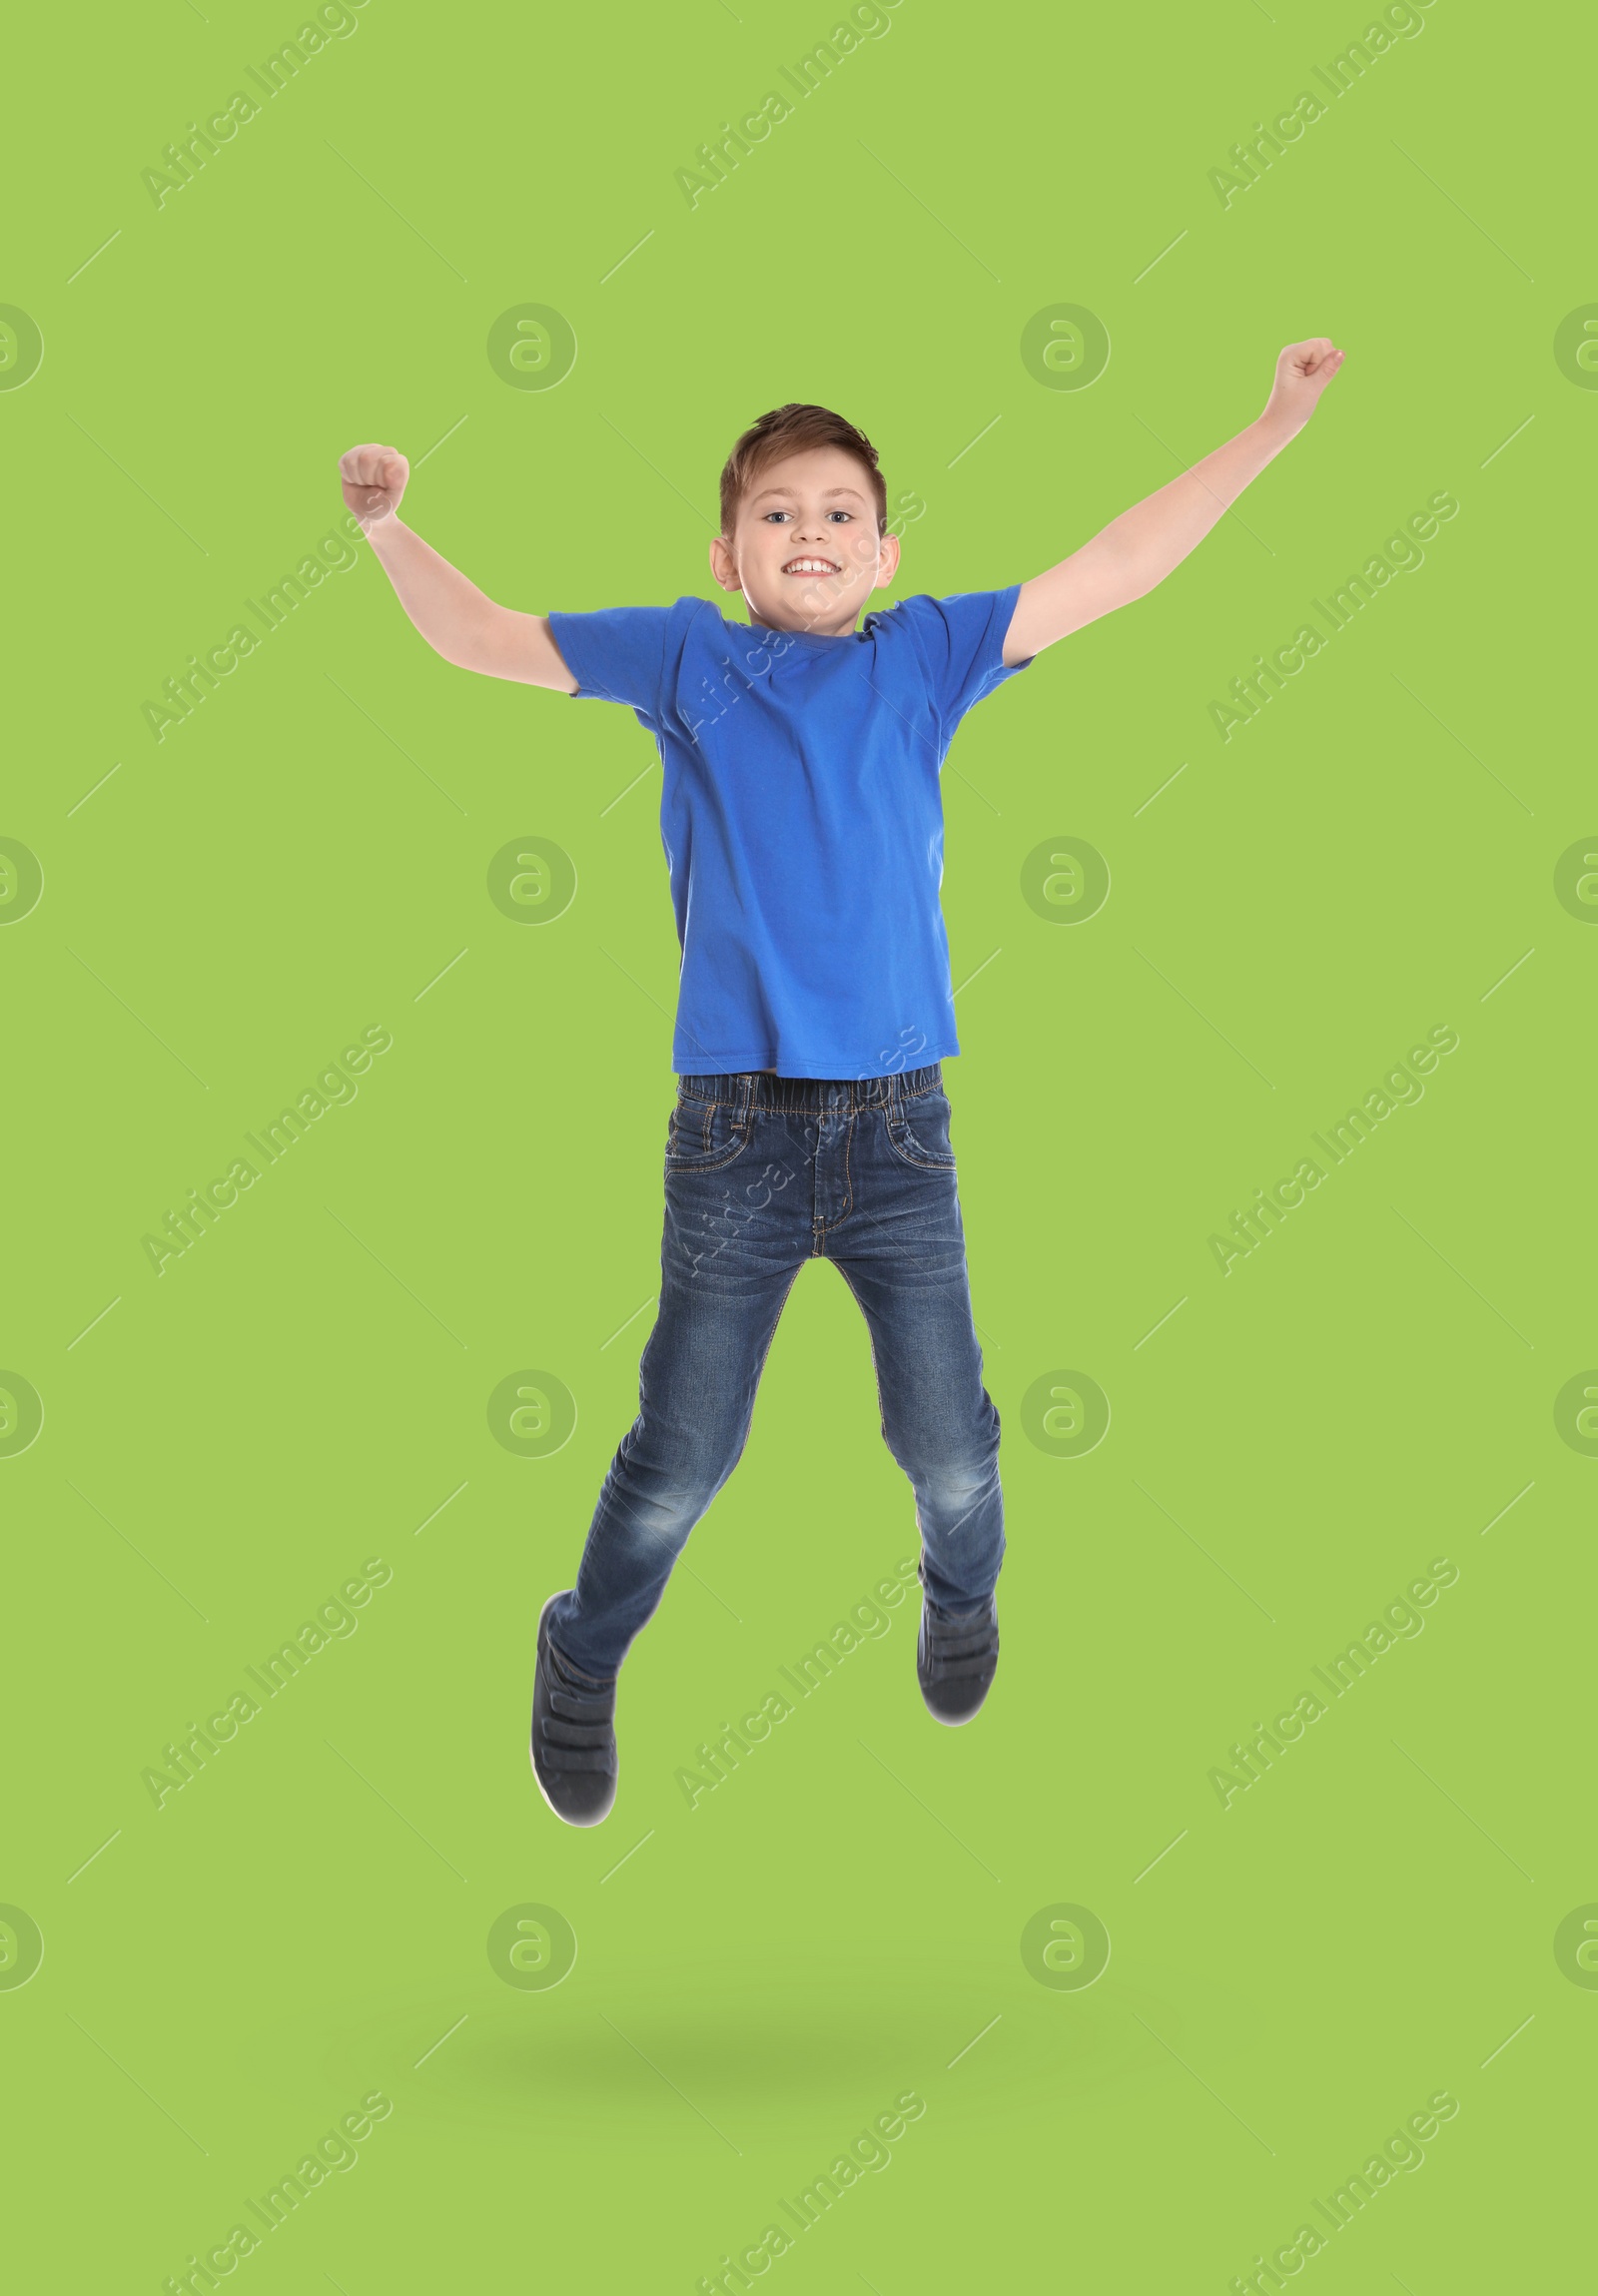 Image of Happy boy jumping on light green background, full length portrait